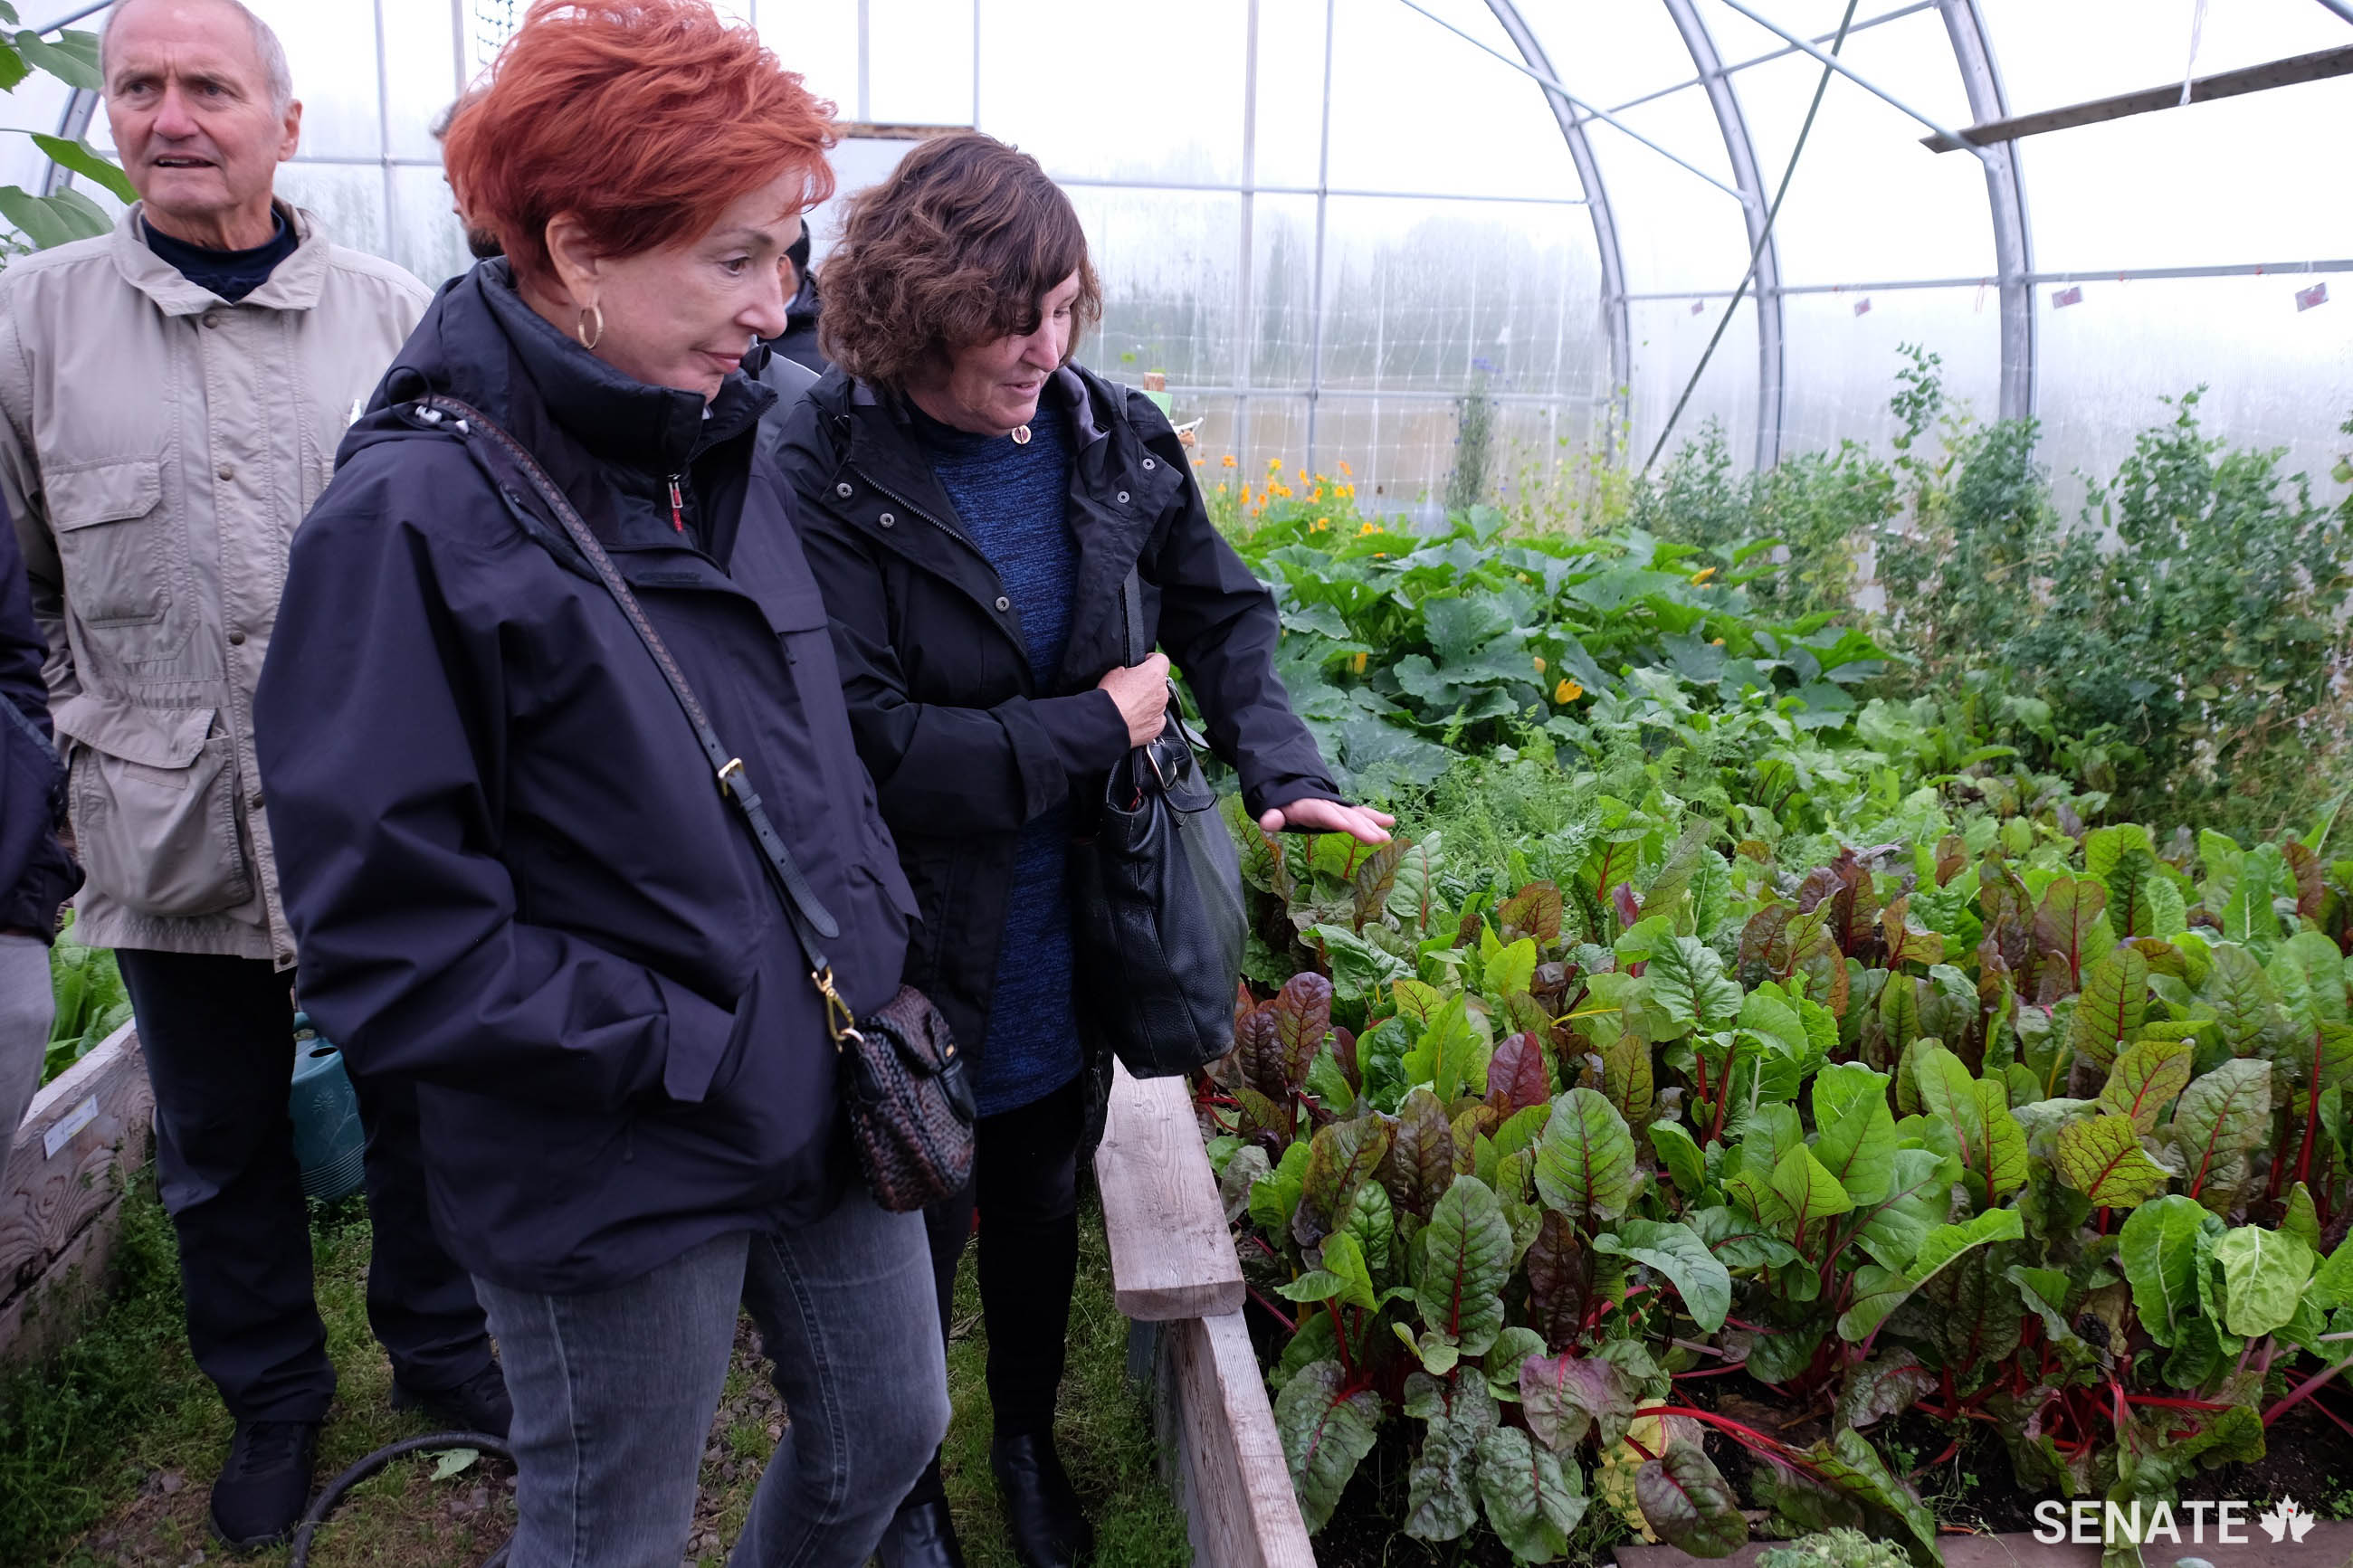 Senators Joseph Day, Nicole Eaton and Mary Coyle tour a greenhouse in Kuujjuaq, Quebec, during the Special Senate Committee on the Arctic’s fact-finding mission in northern Canada in September 2018.